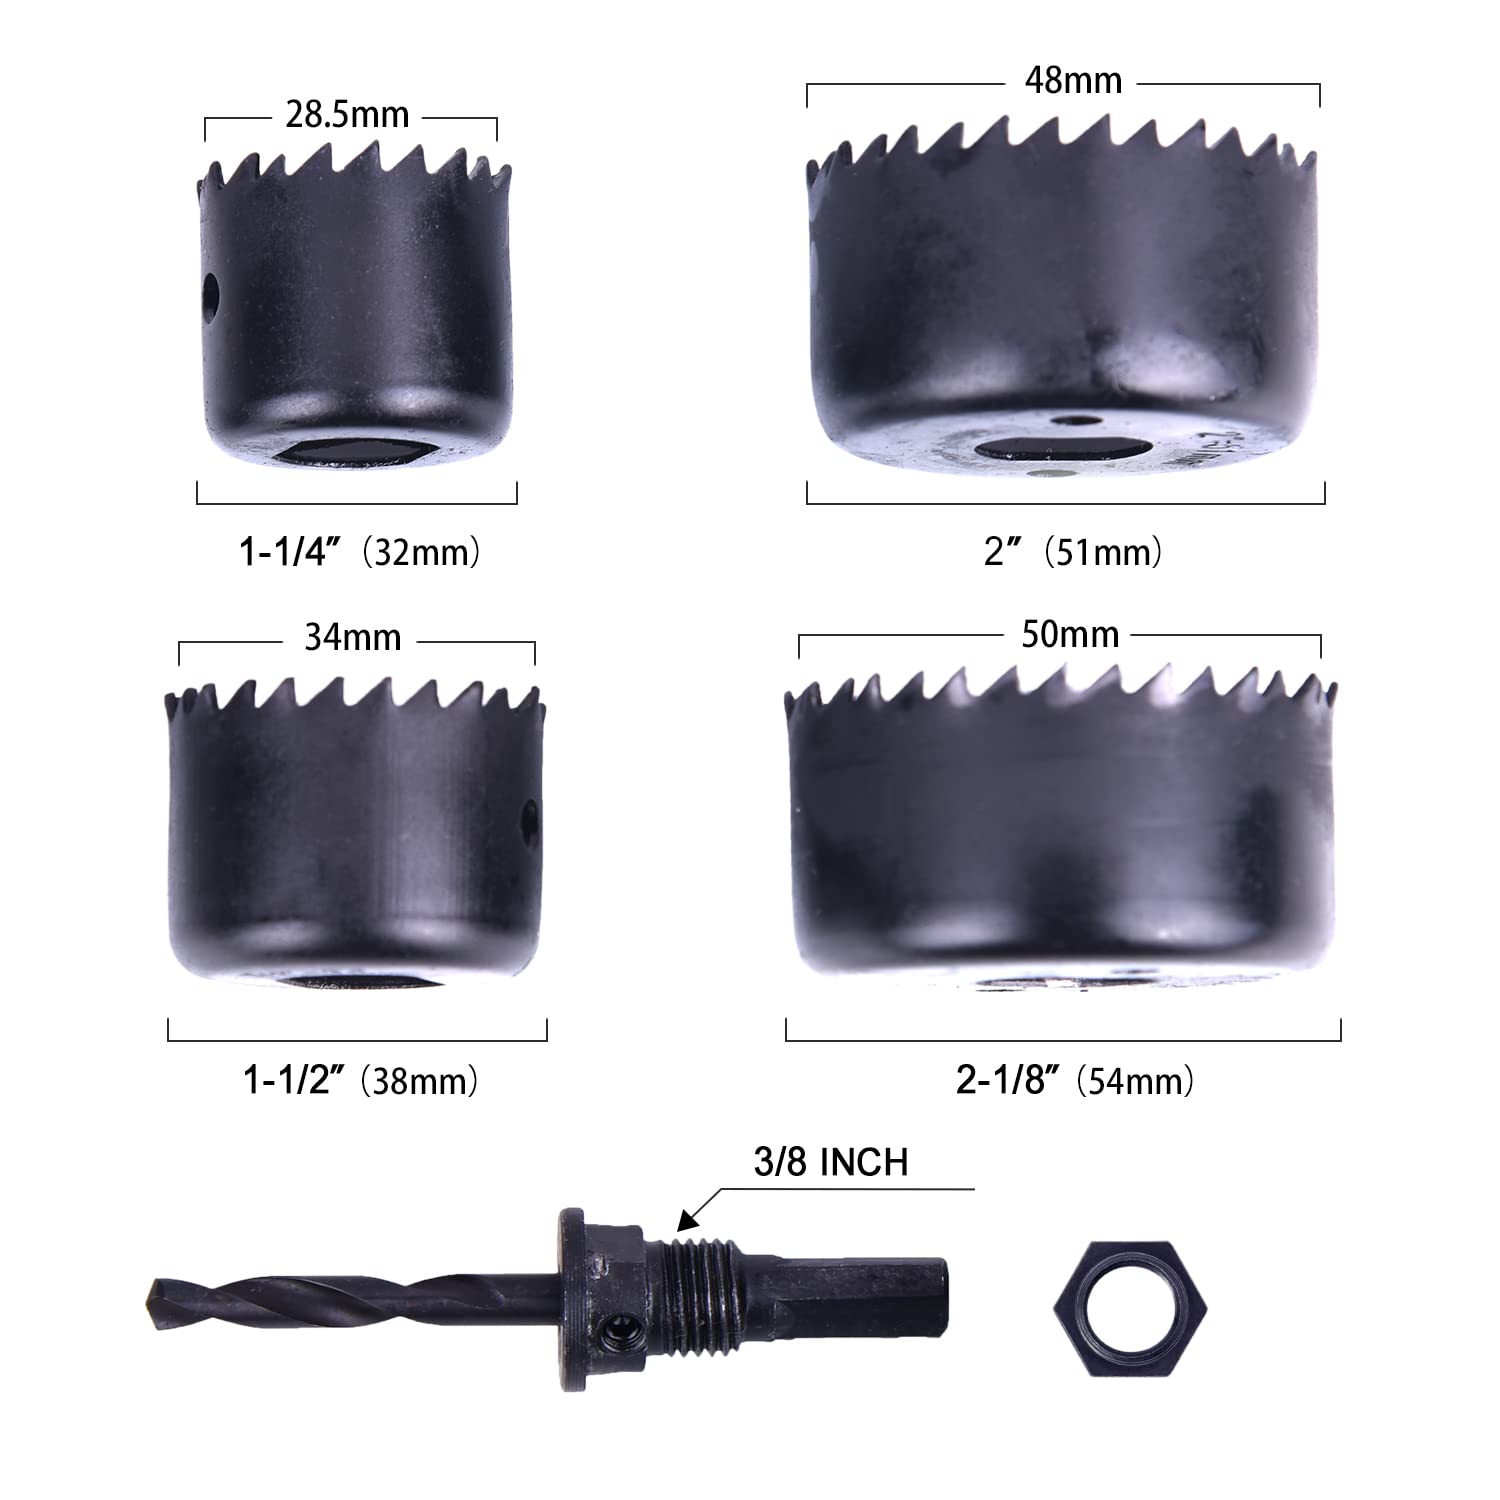 Hole Saw Kit, SUNGATOR 5-Piece Hole Saw Set with 4 Pcs Saw Blades in 1-1/4, 1-1/2, 2, 2-1/8 Inch, 1 Mandrel. Carbon Steel Circle Hole Saw Kit, Arbored Hole Cutter for Wood, Plastic, PVC Board, Drywall